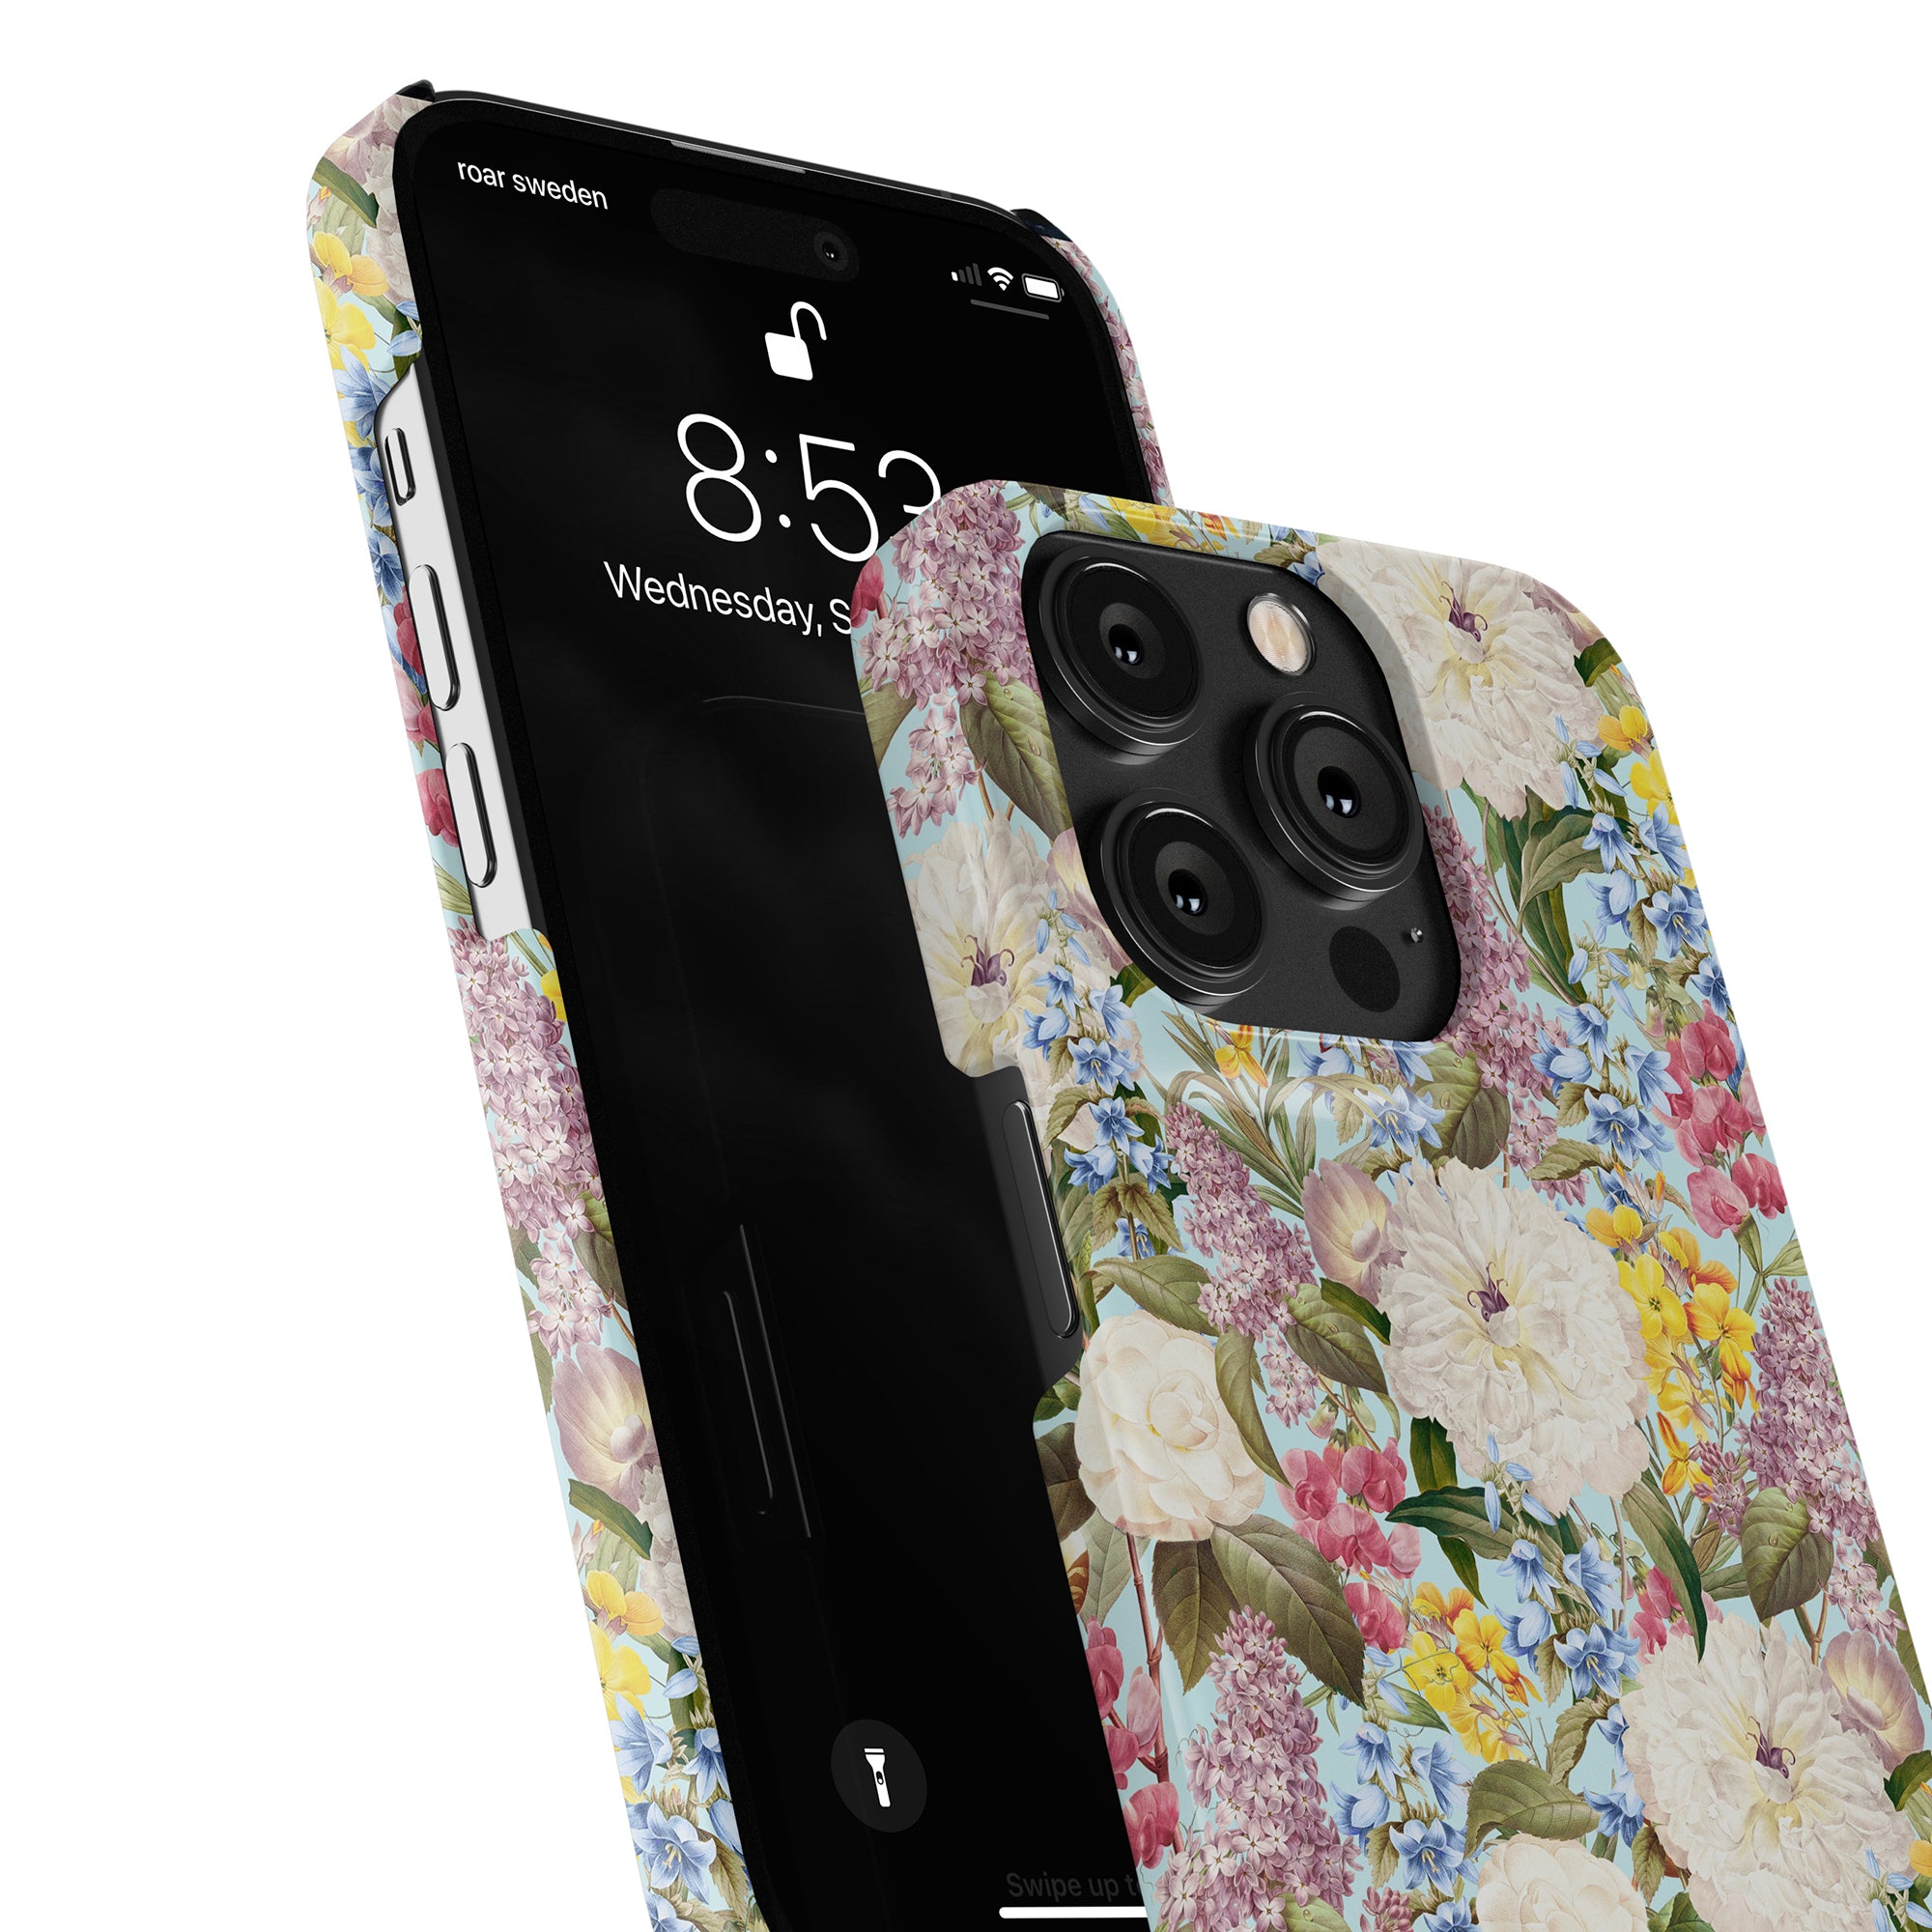 A smartphone with a Fragrant Paradise - Slim case displaying its triple-lens rear camera, a key feature emphasized in the product description for SEO purposes.